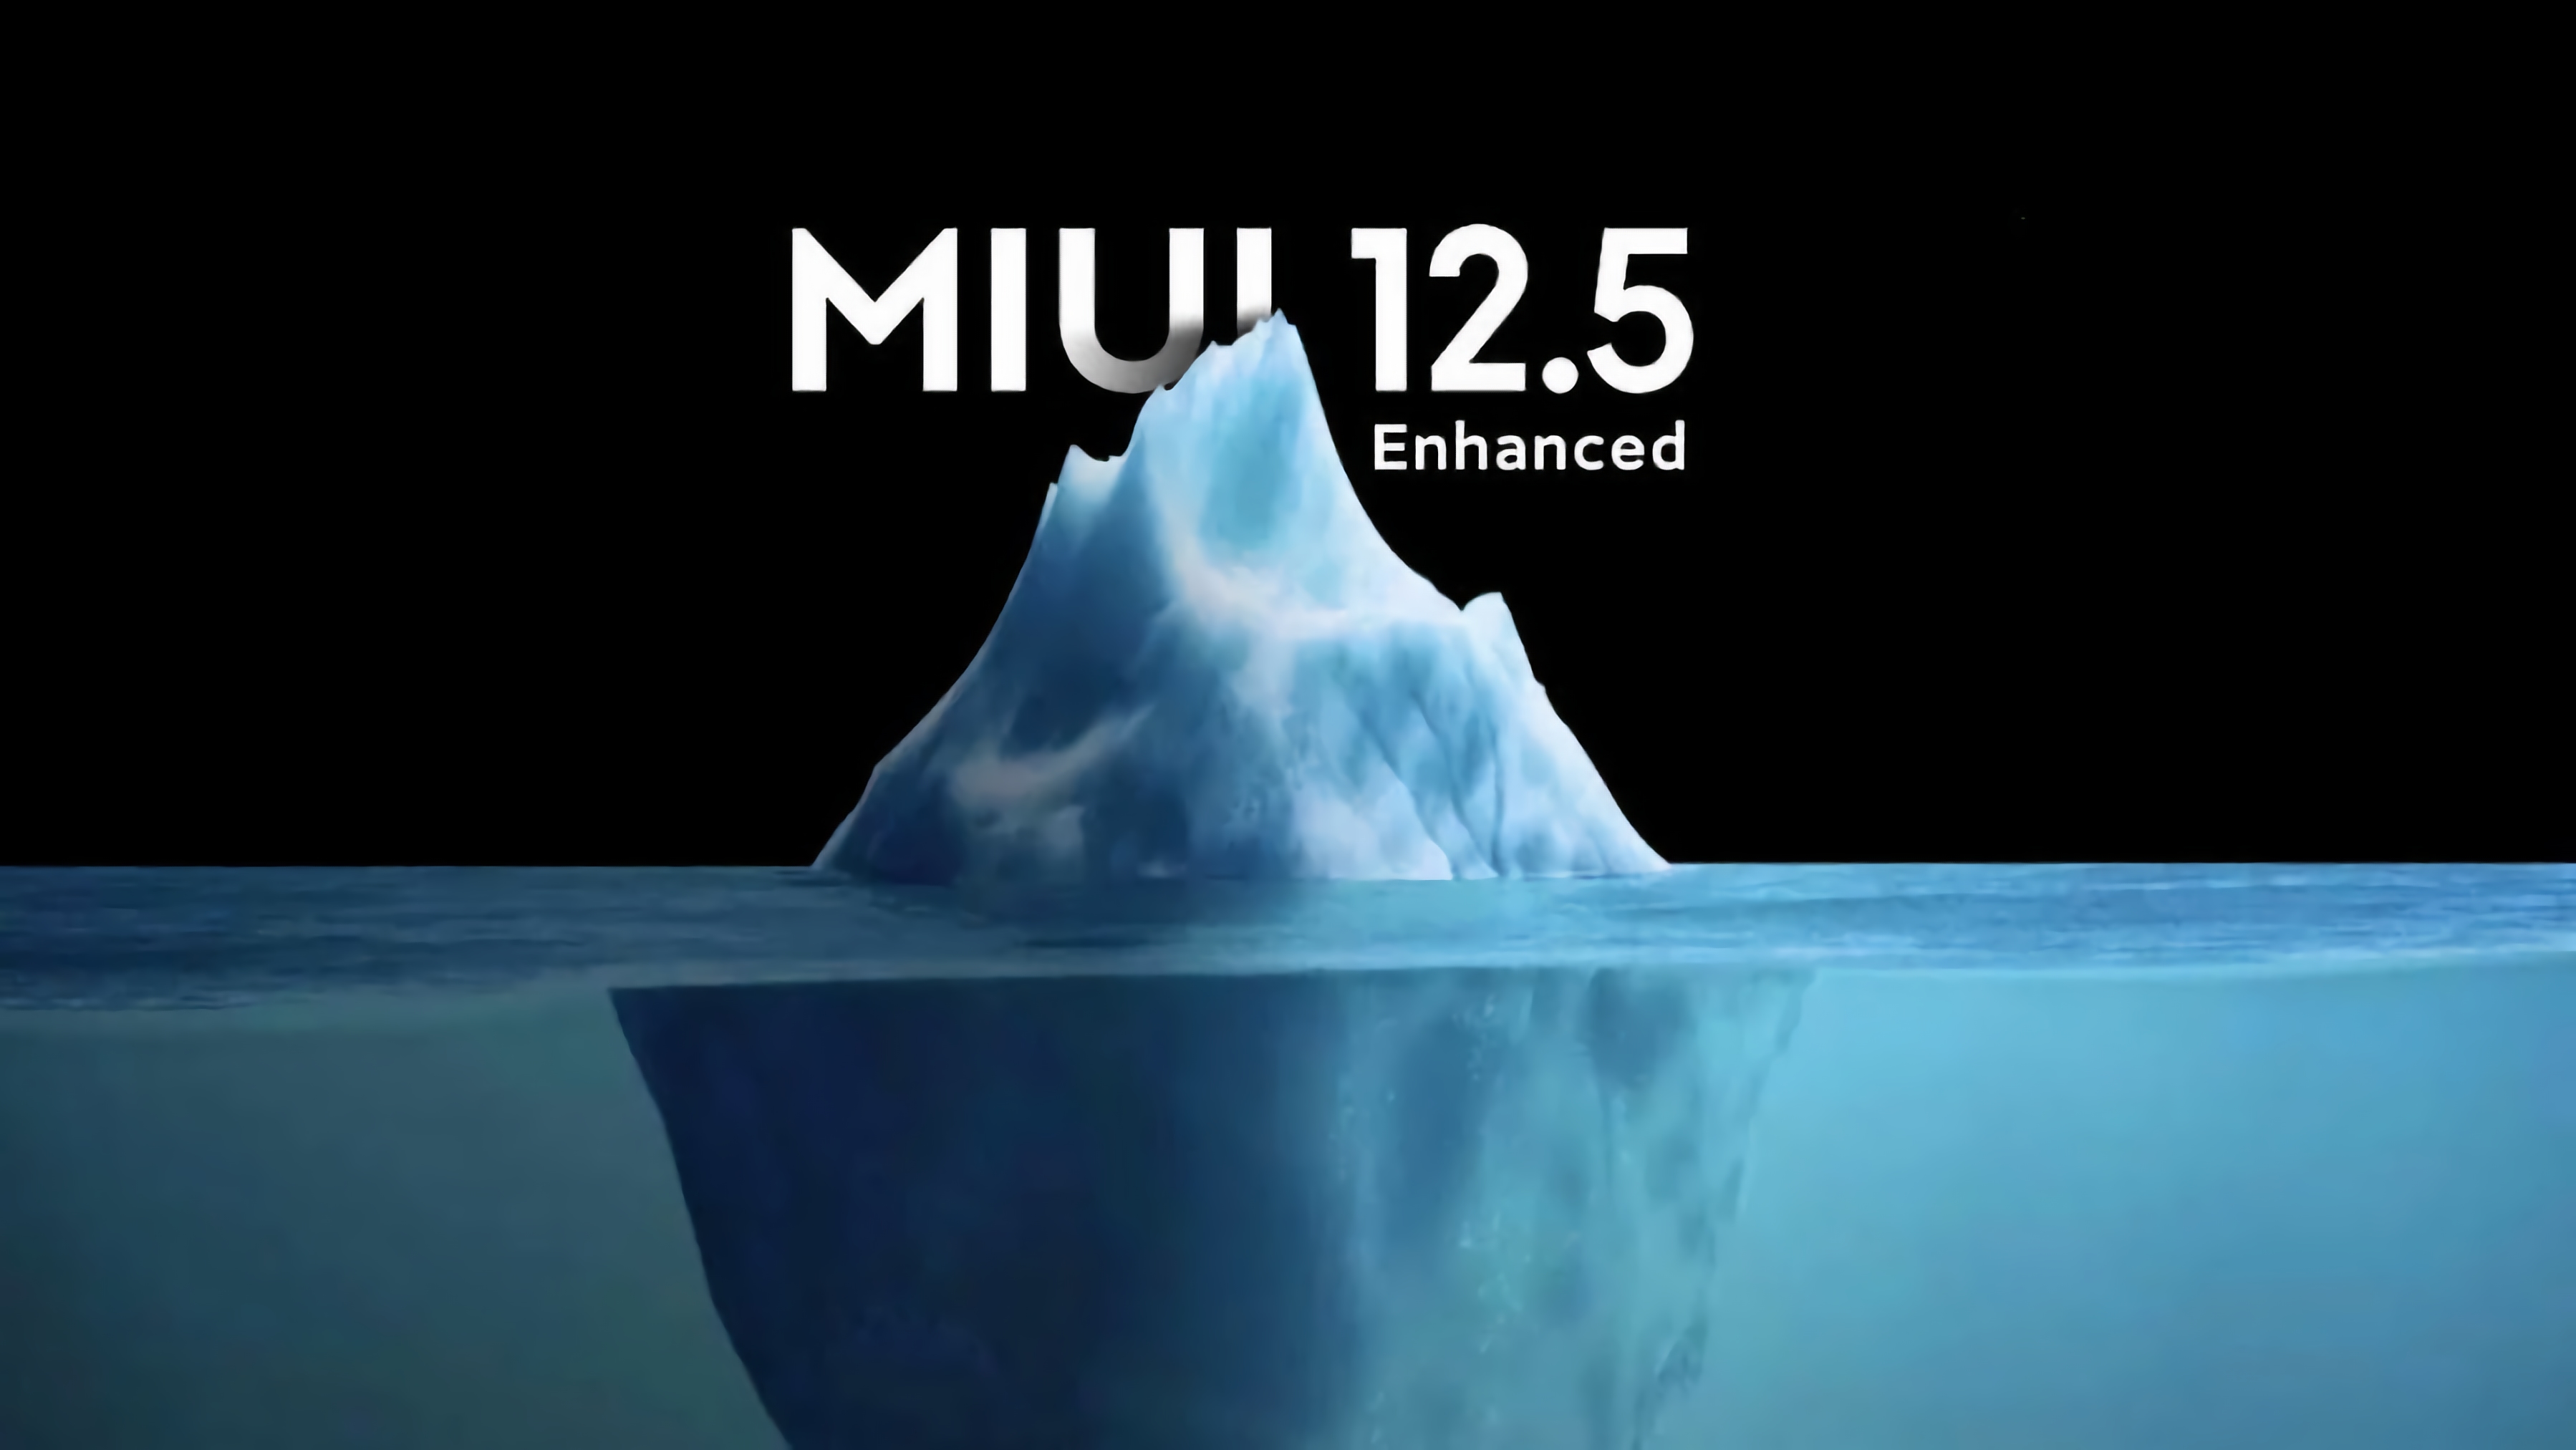 Which Redmi smartphones will not receive MIUI 12.5 Enhanced Edition?